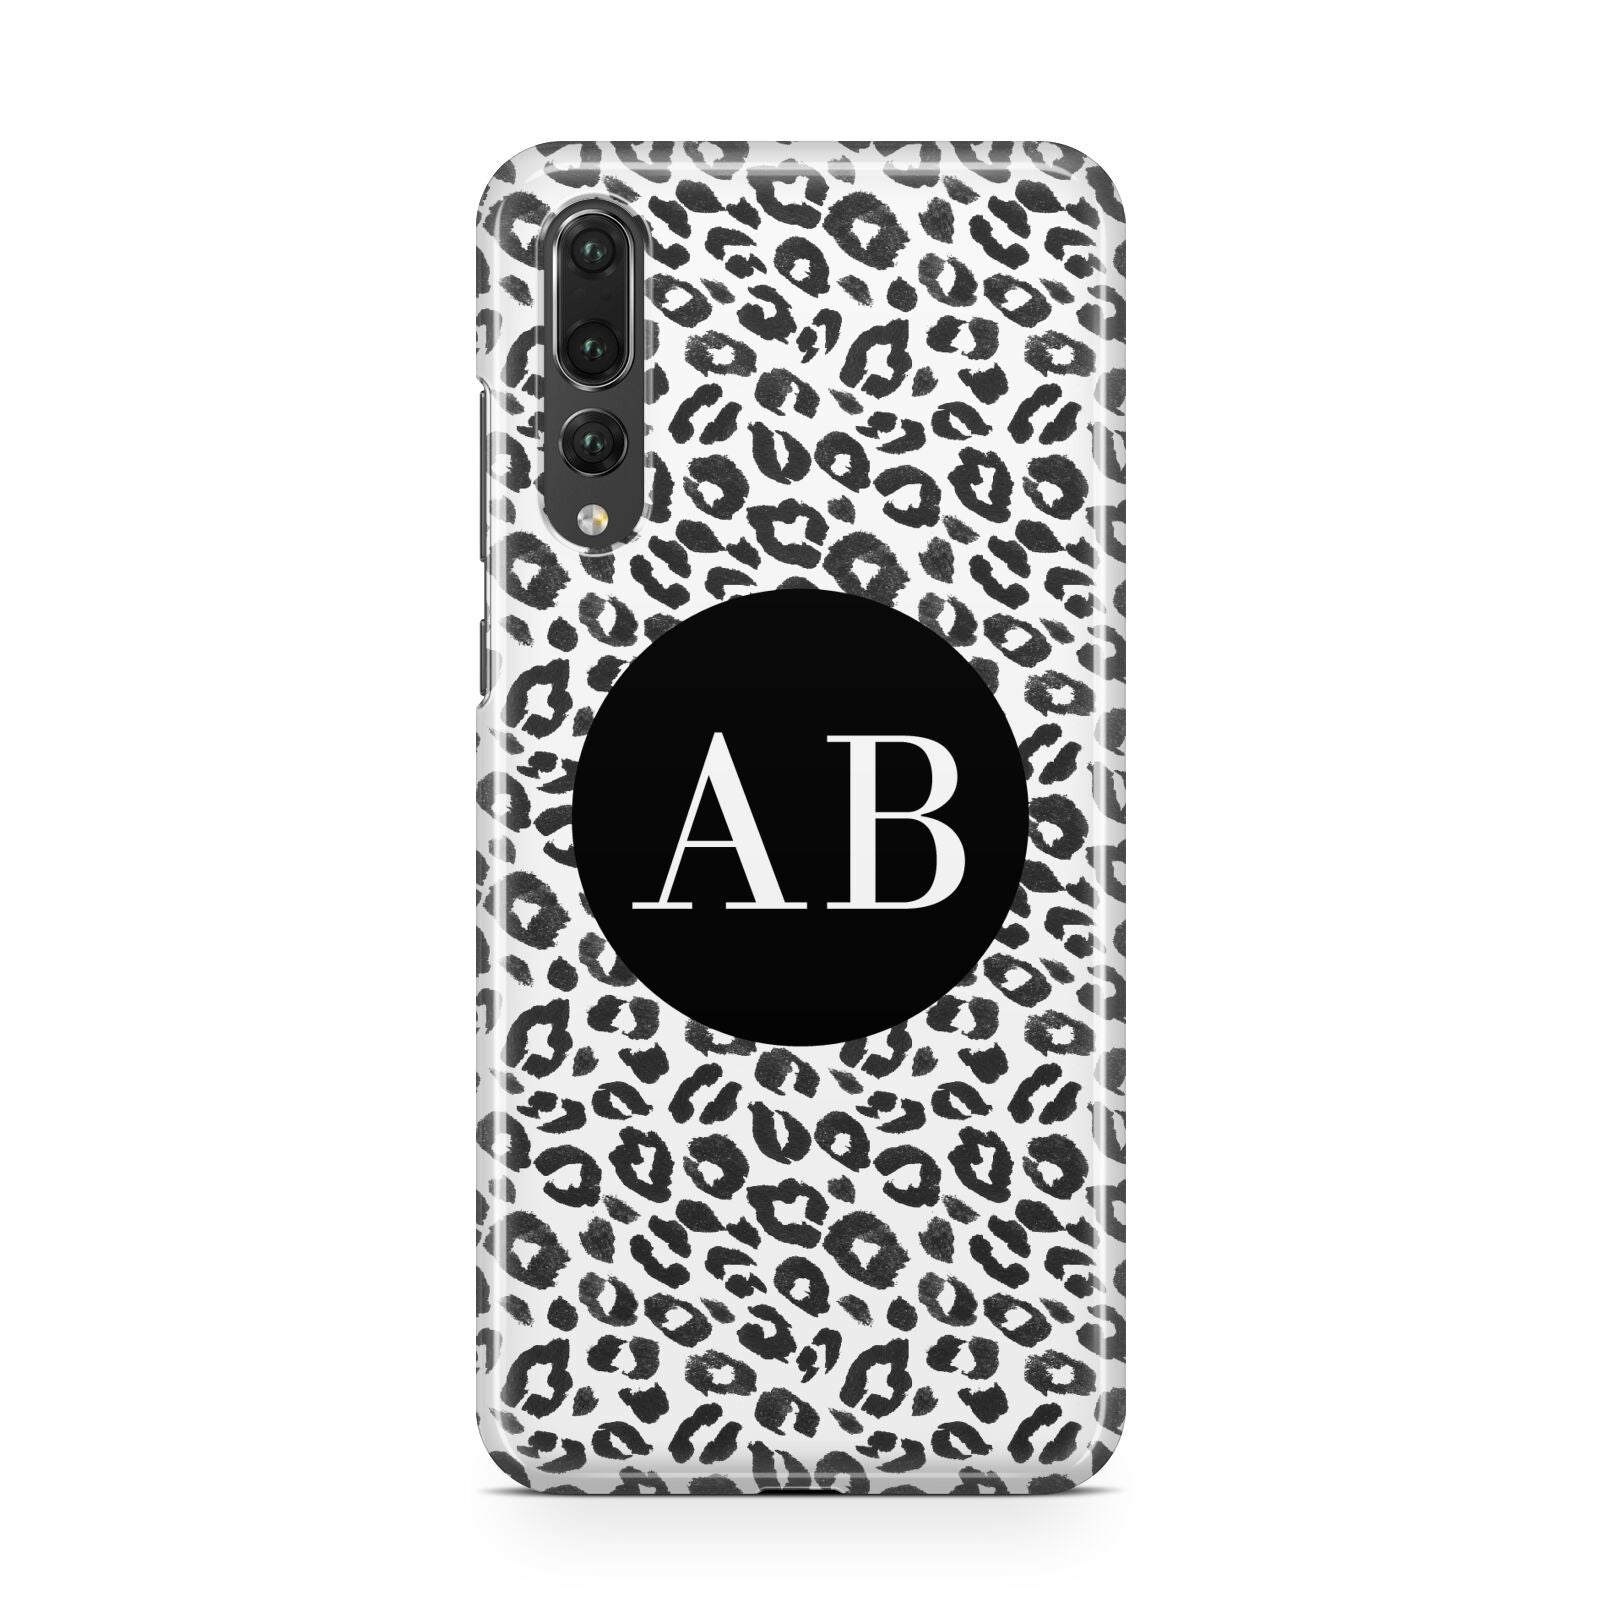 Leopard Print Black and White Huawei P20 Pro Phone Case